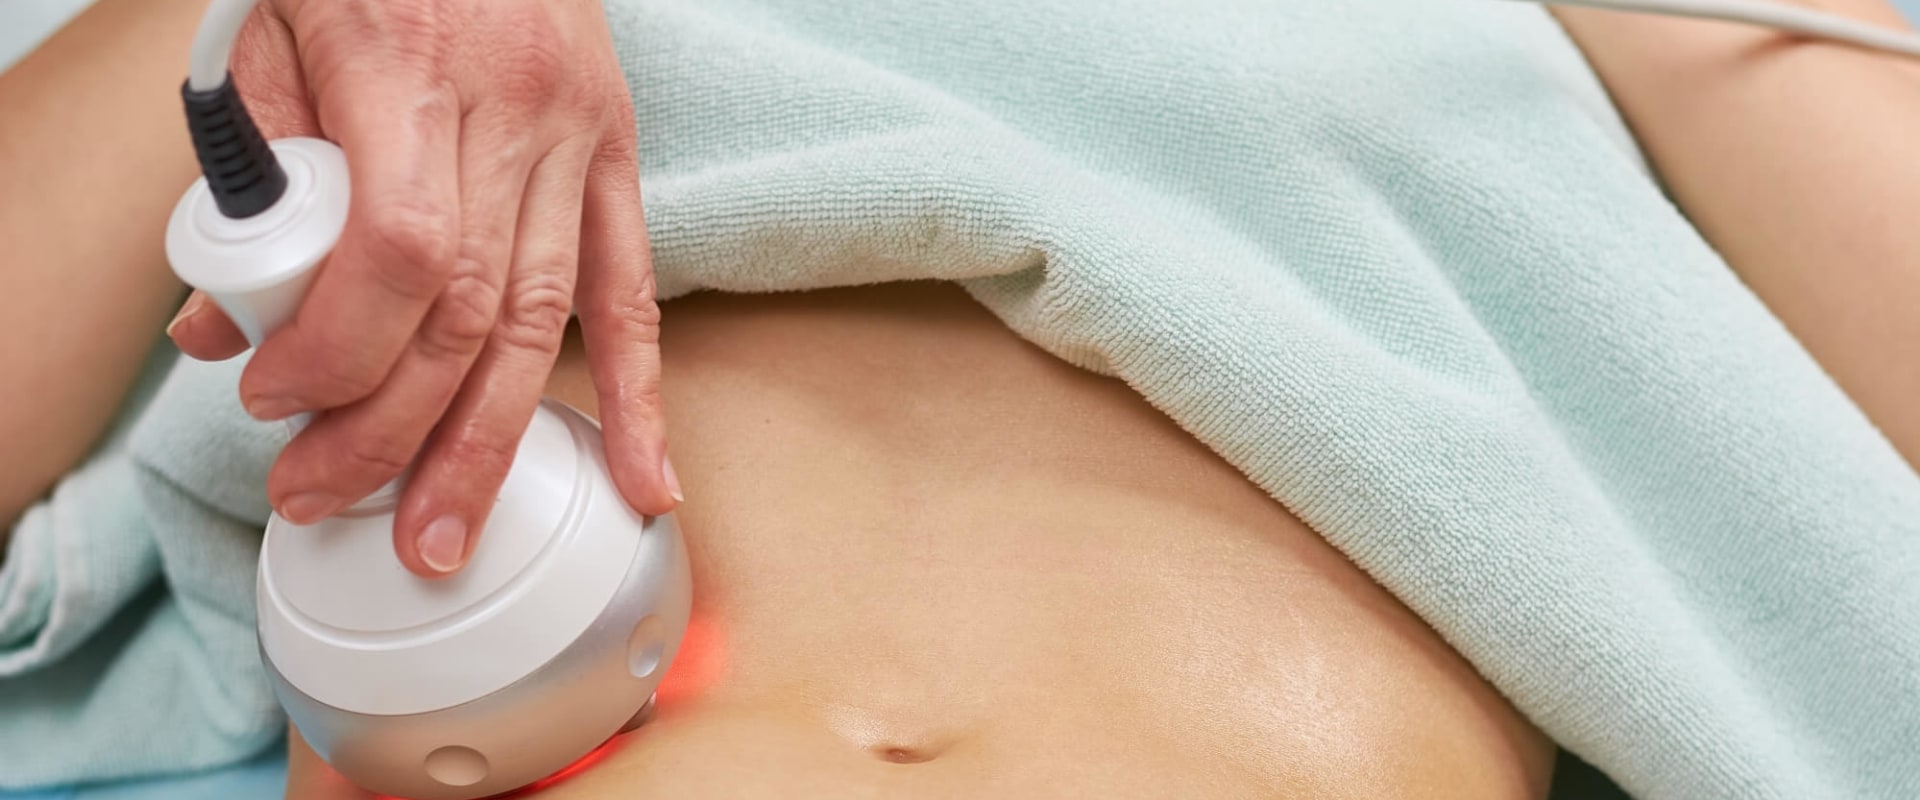 Non-Surgical Fat Reduction: Minimally Invasive Treatments Explained